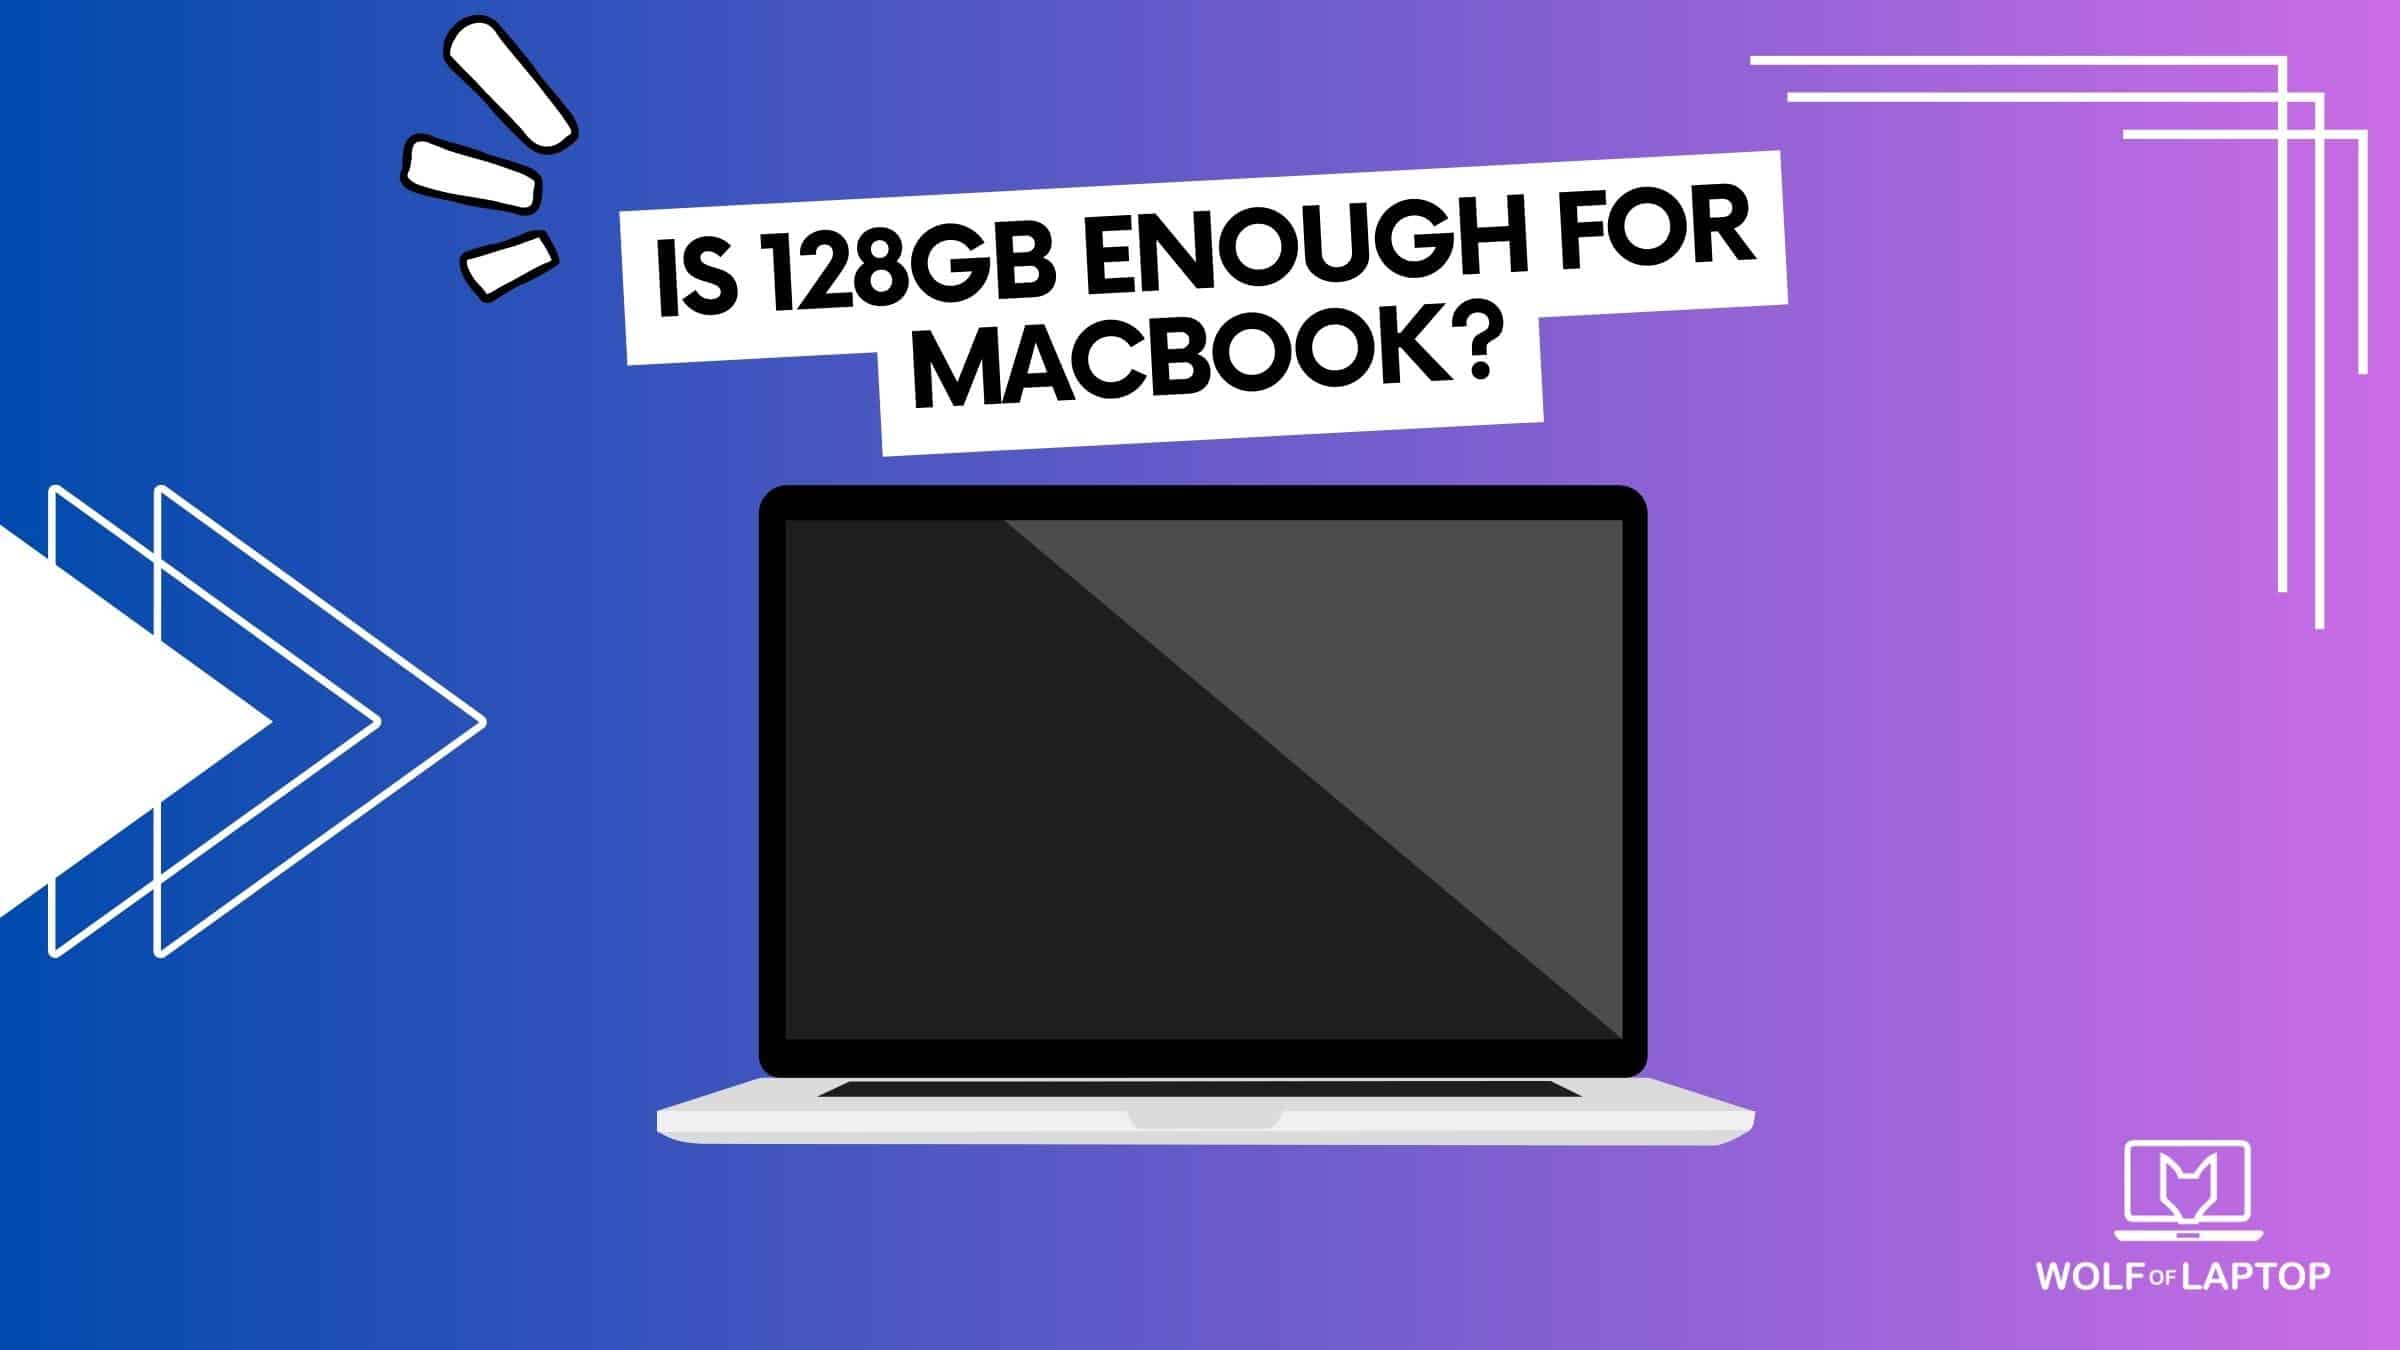 is 128gb enough storage for macbook - answered